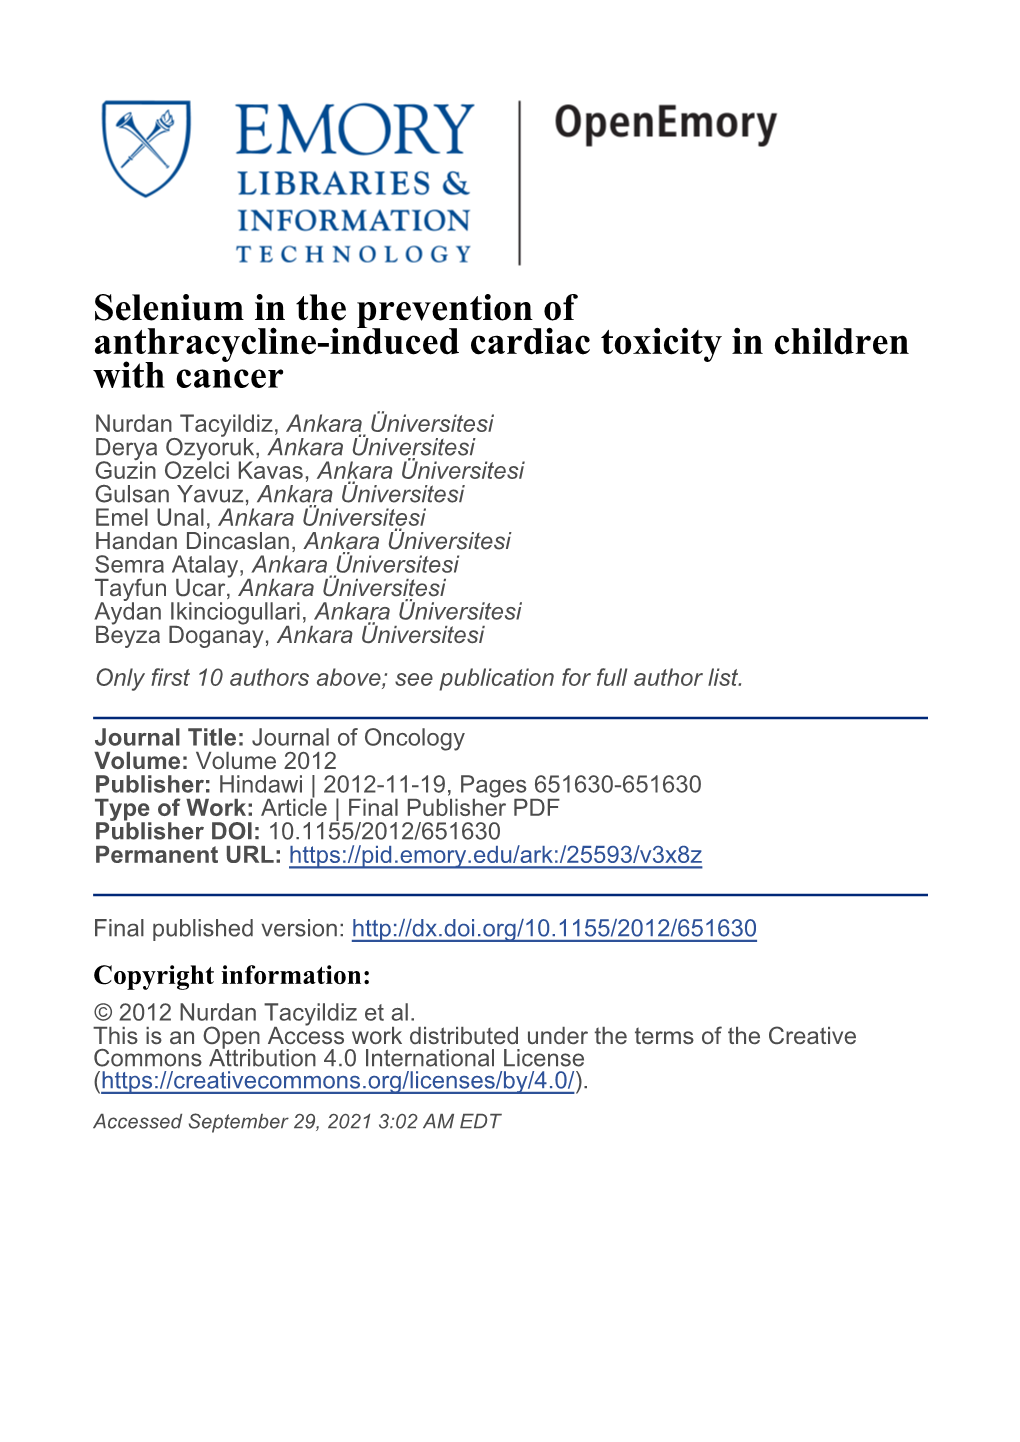 Selenium in the Prevention of Anthracycline